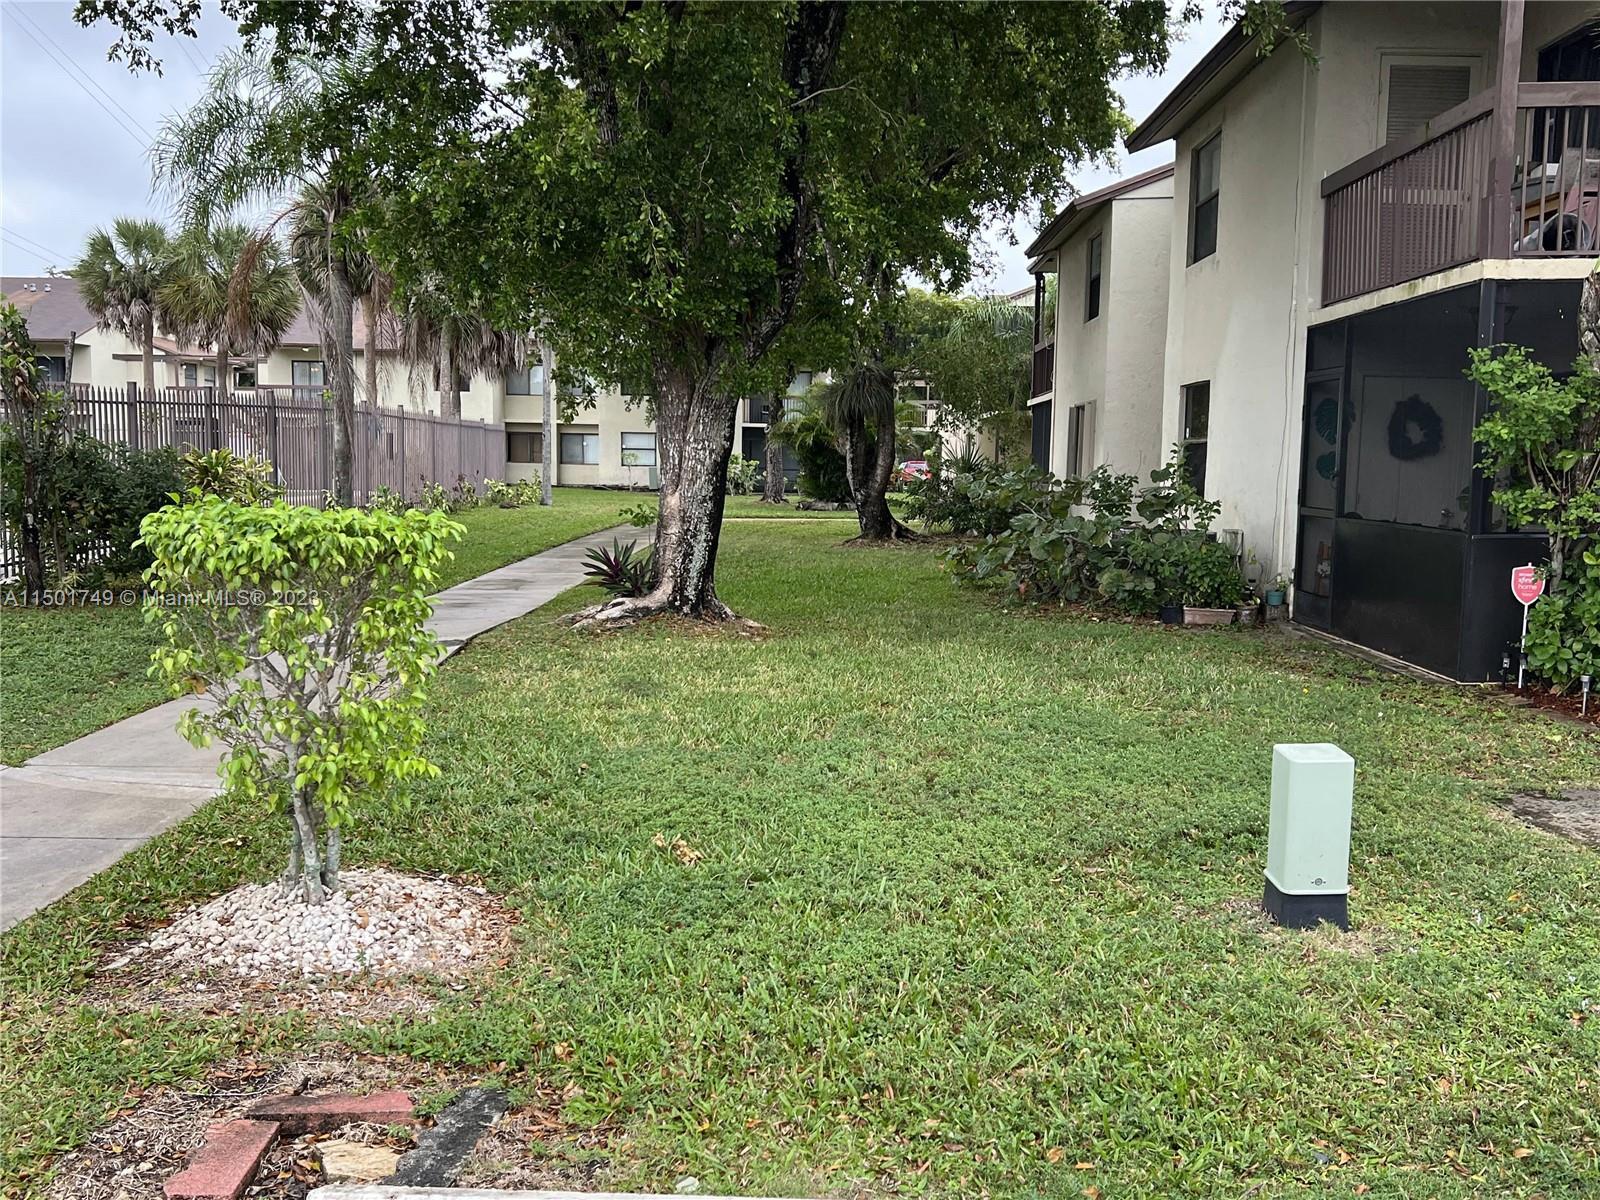 Photo of 455 NW 210th St #202 in Miami Gardens, FL